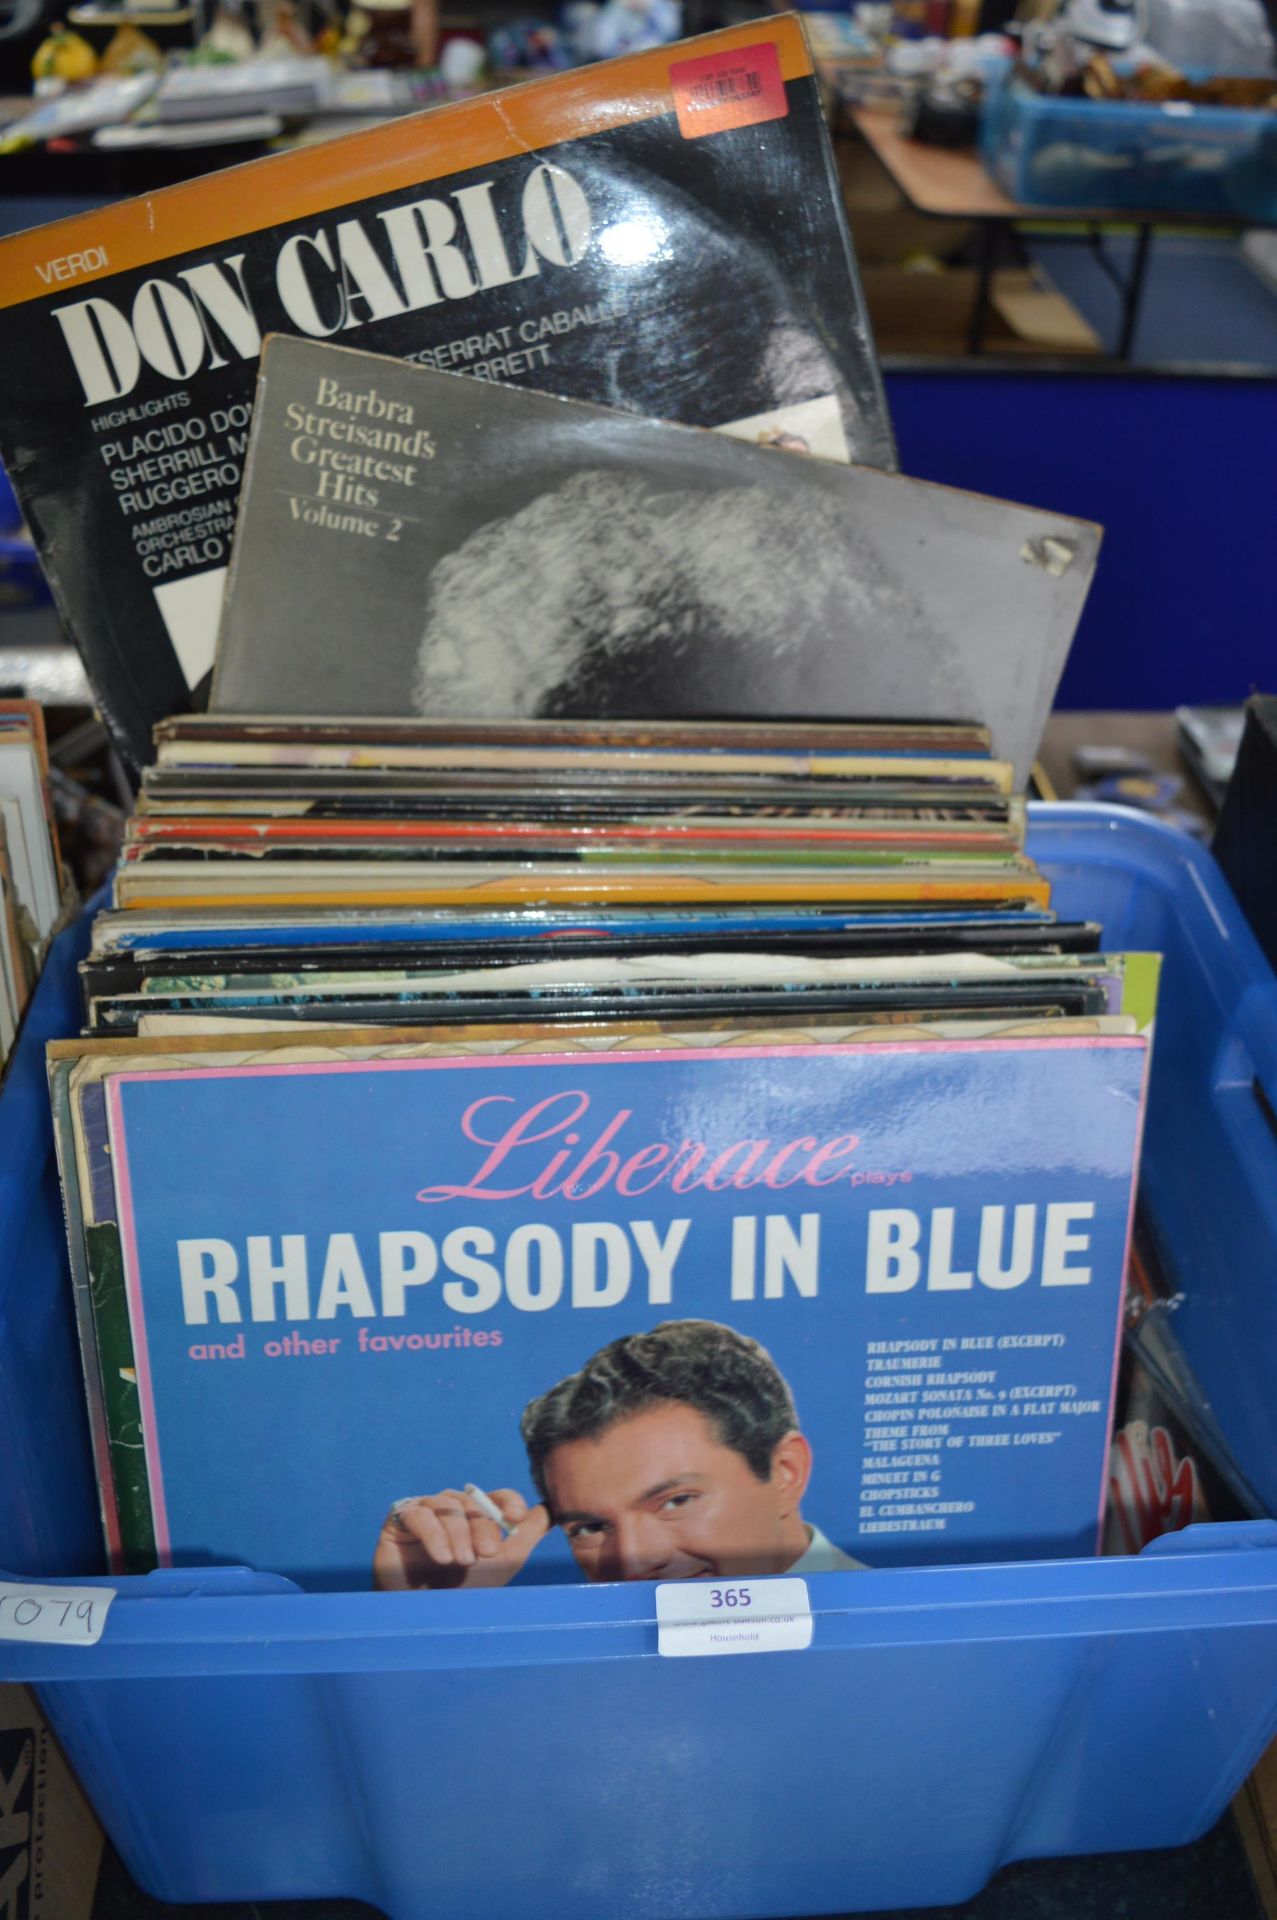 12" LP Records and a Case of Singles